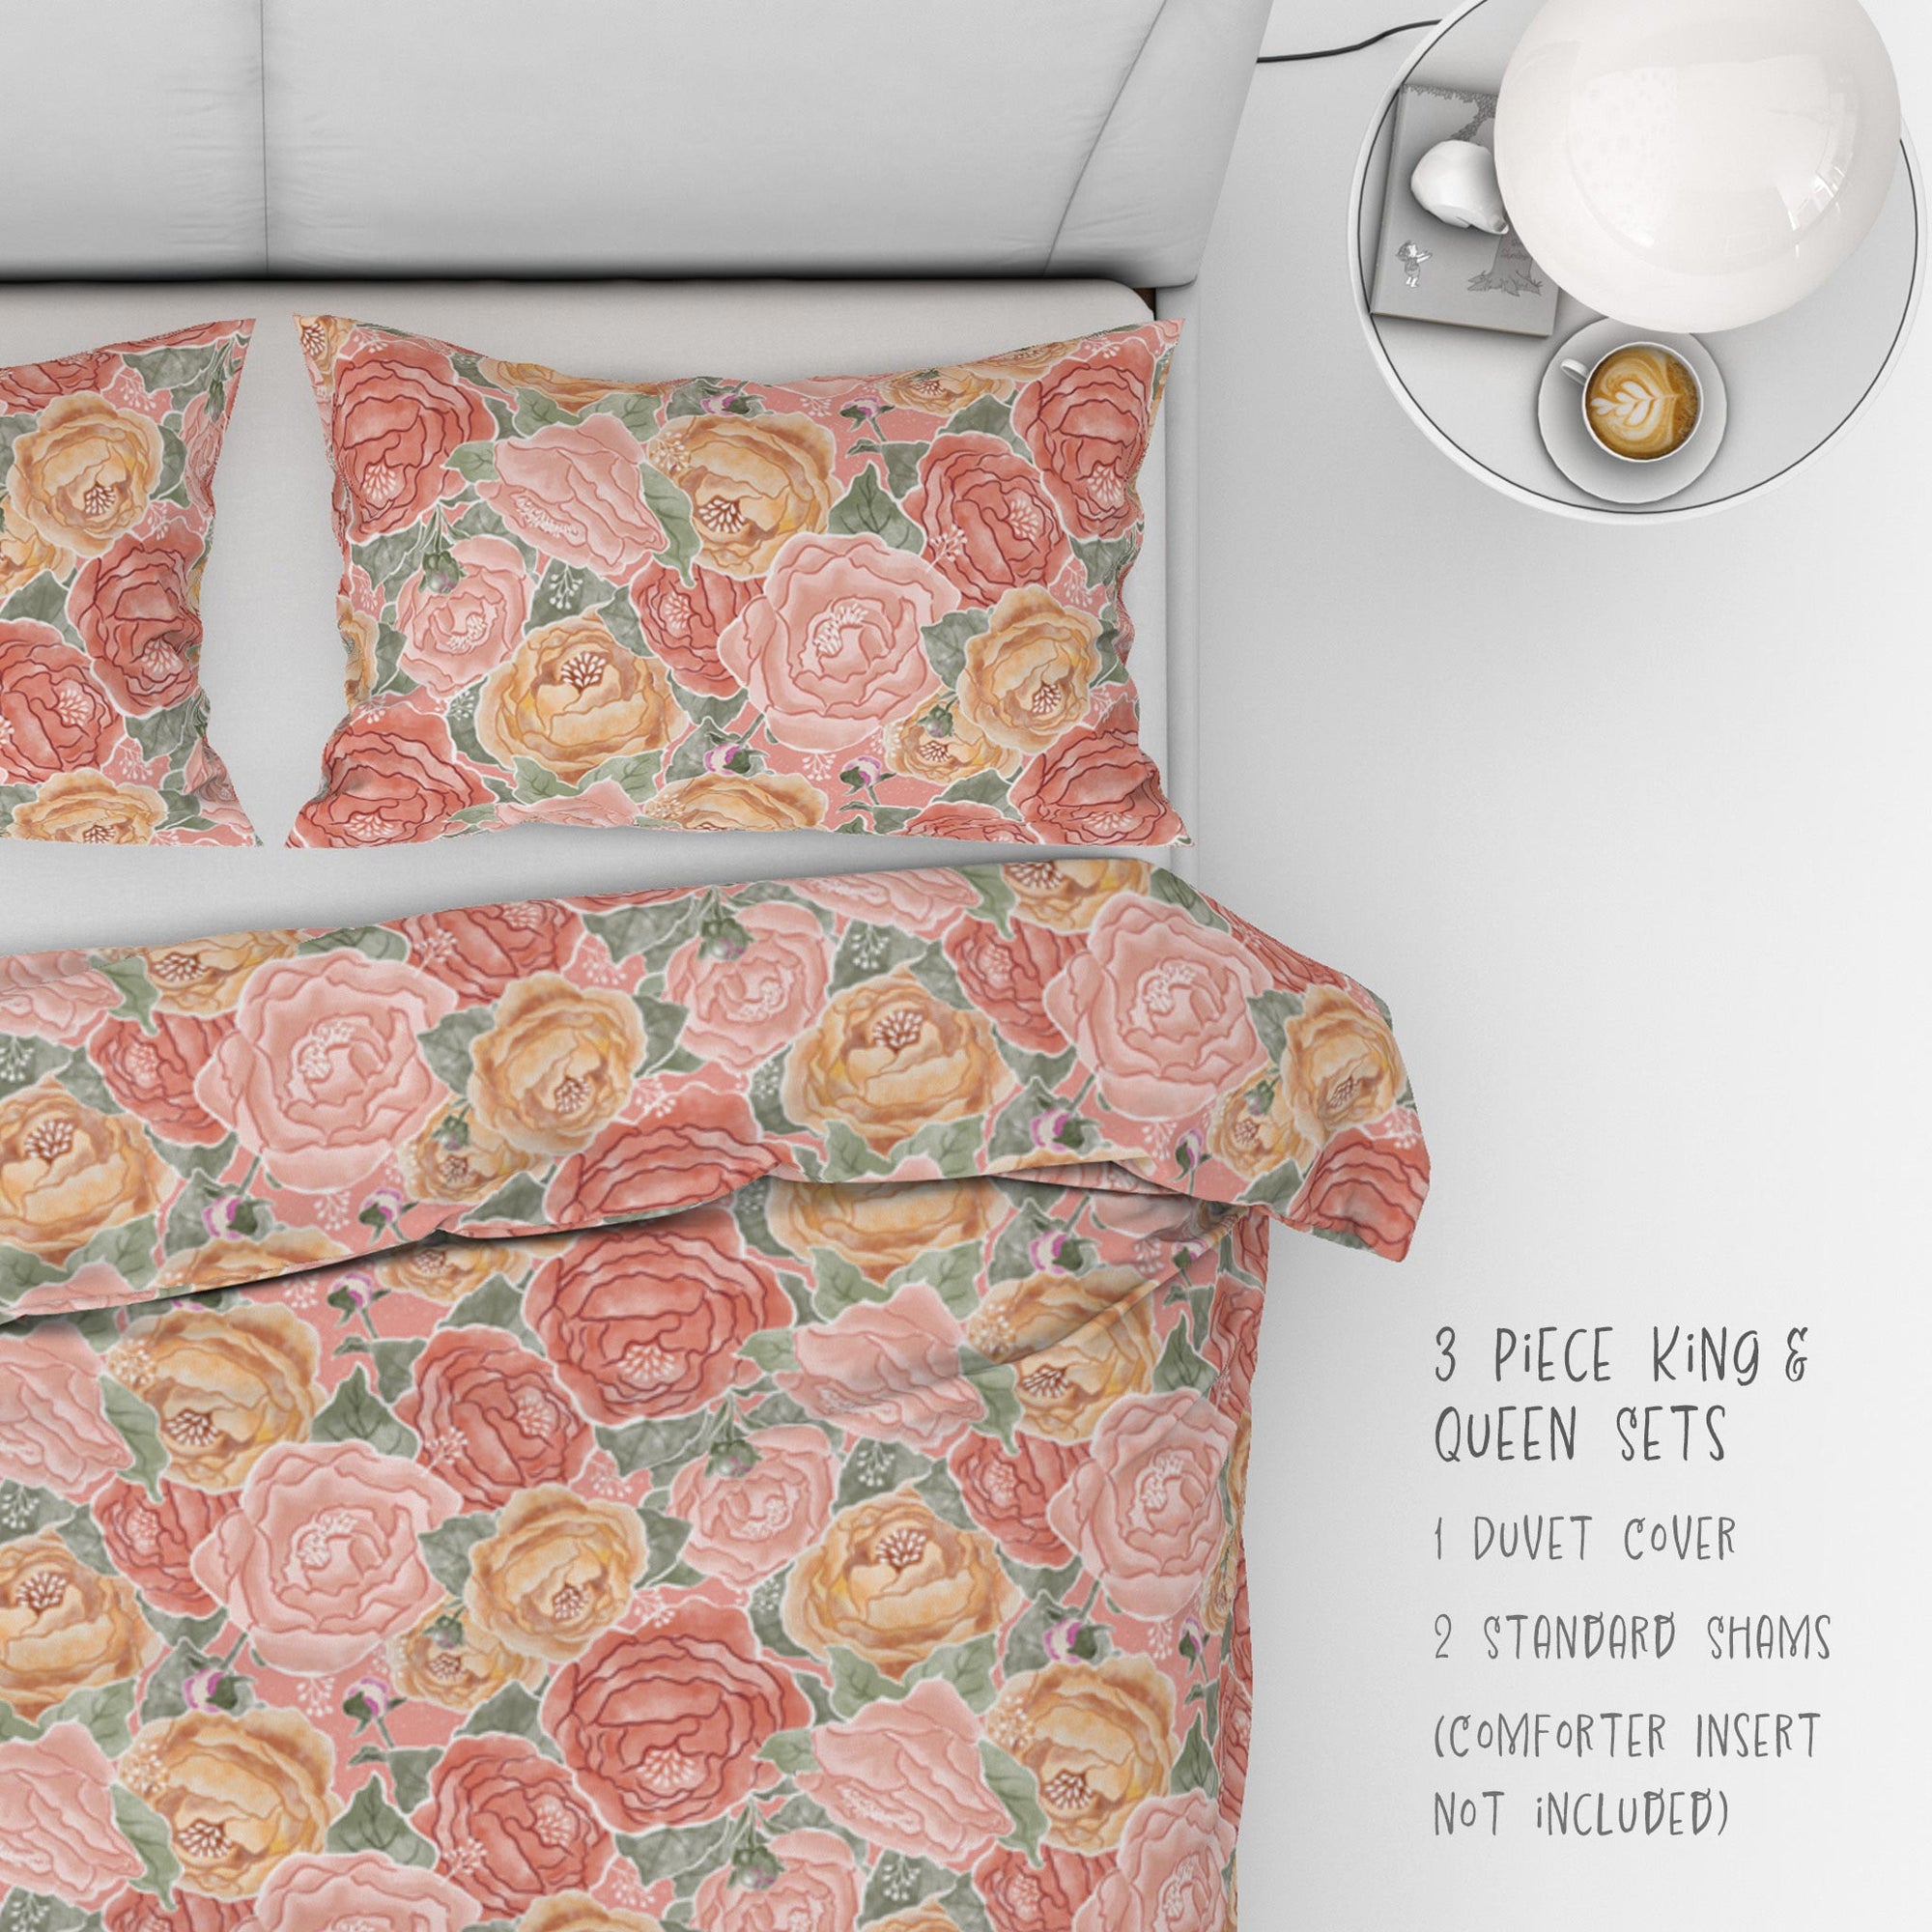 Pretty in Peony Bedding Collection with Pink Background. Buy a three piece set: 2 shams and duvet or as 6 piece set: 2 shams, duvet, 2 throw pillows, and 1 lumbar